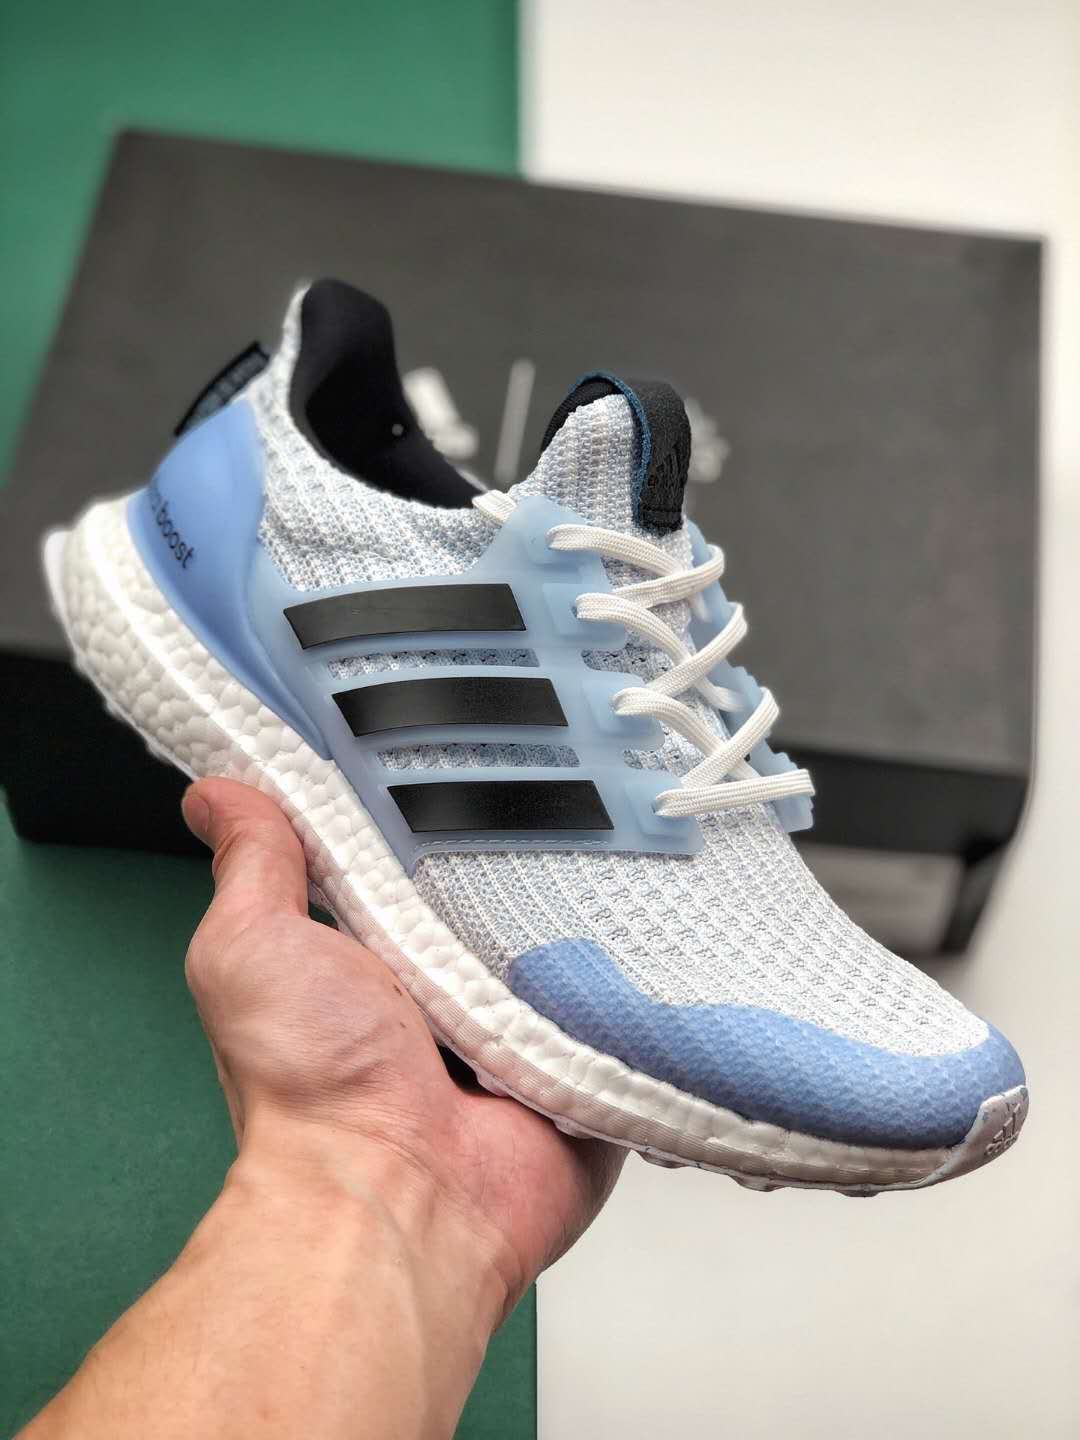 Adidas Game Of Thrones x UltraBoost 4.0 White Walkers - Stylish and Impressive Footwear